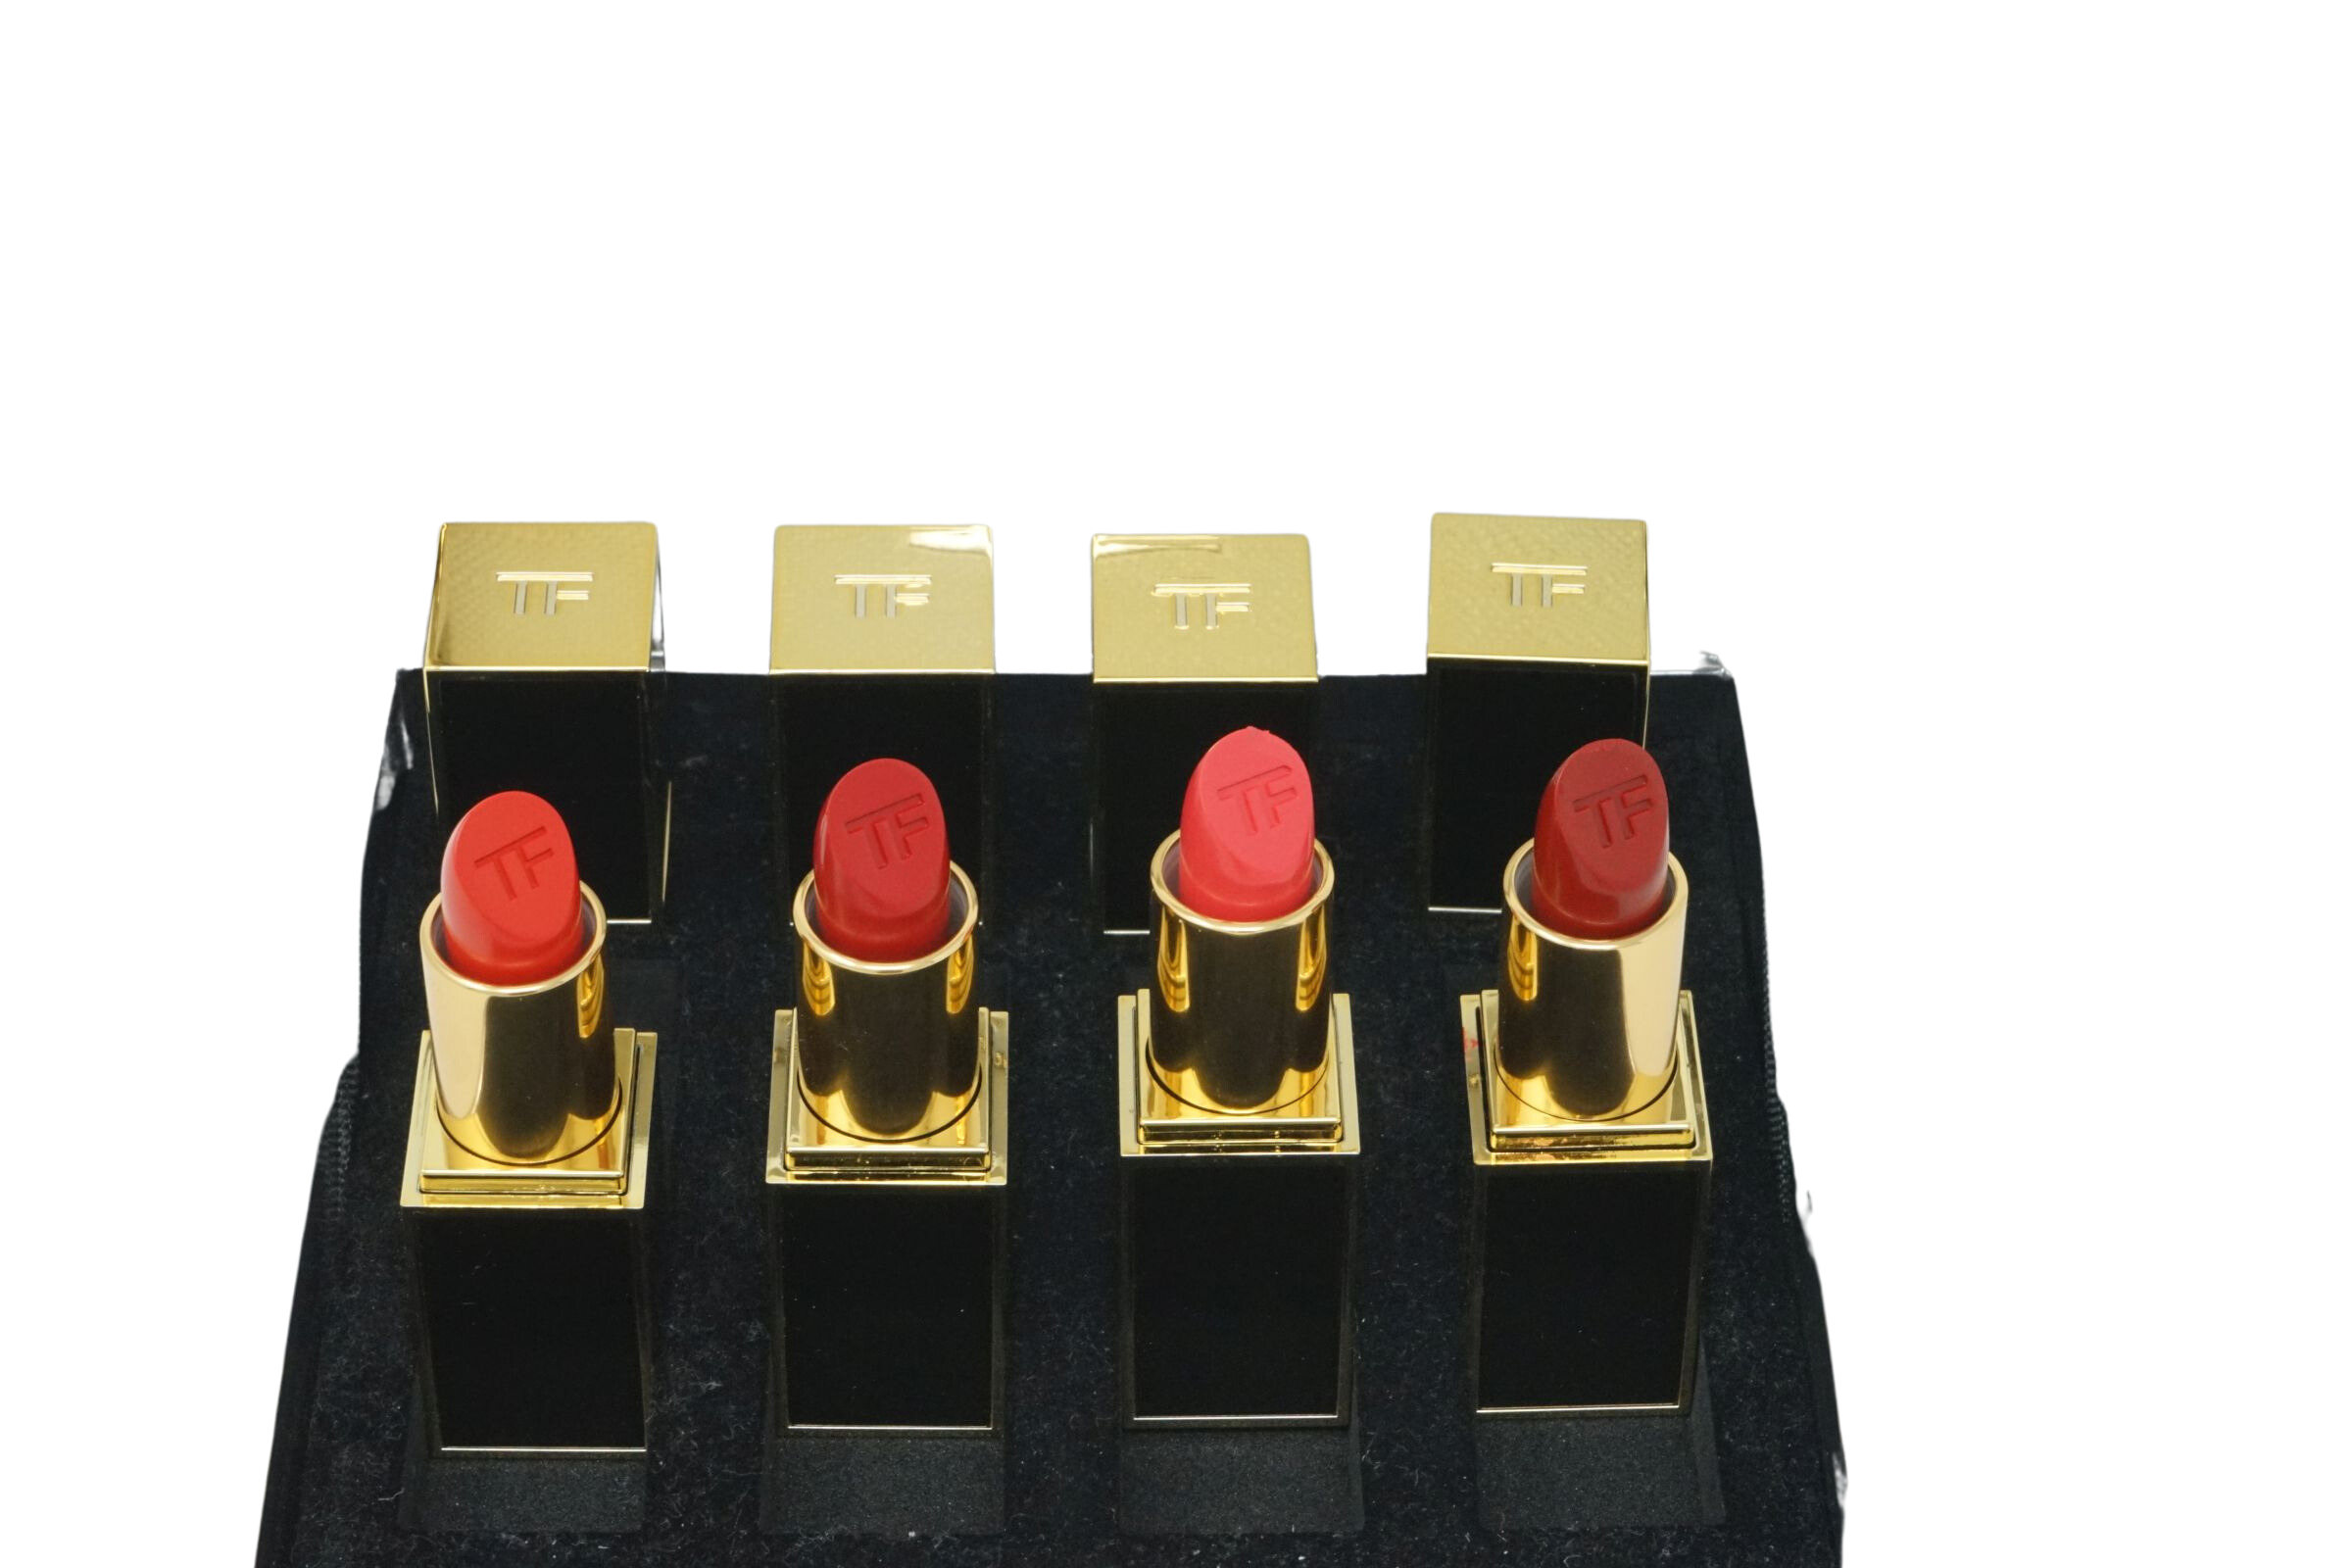 Tom Ford Lip Color Set 09 True Coral + 16 Scarlet Rouge + 06 Flame + 07 Ruby Rush